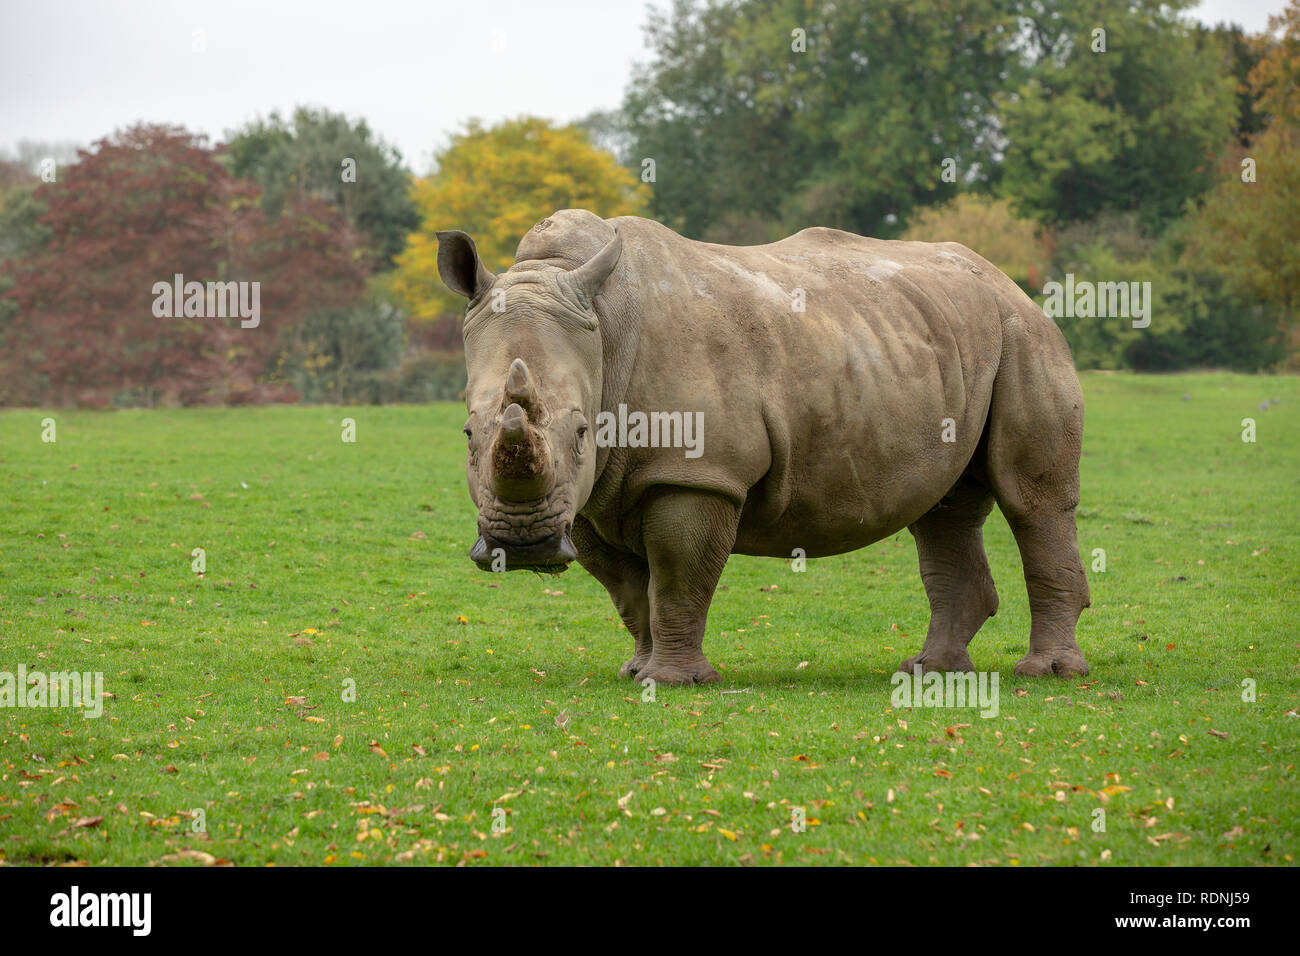 Mean looking Rhino staring at the camera. Lone animal in a grassy field with trees behind. Stock Photo